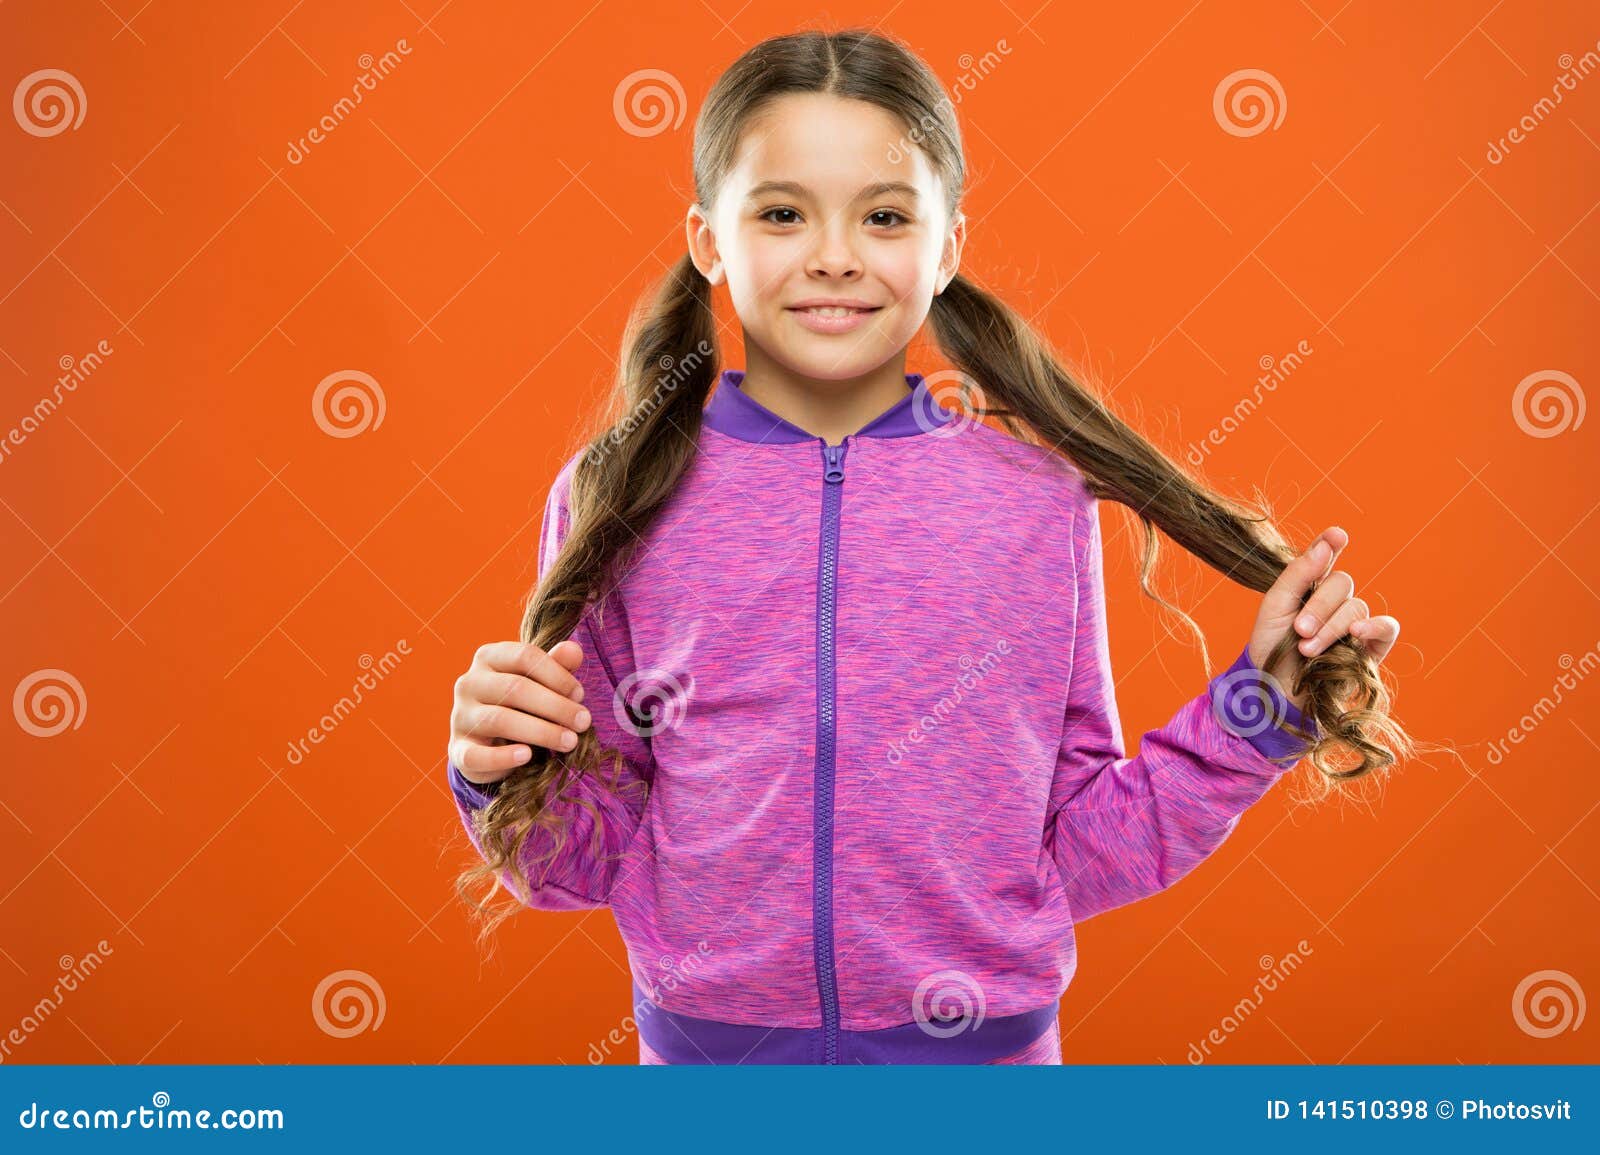 Split Ends Treatment. How To Prevent Split Ends. Treatment Hair Breakage.  Amazing Beauty Remedies for Split Hair Stock Photo - Image of cute, small:  141510398